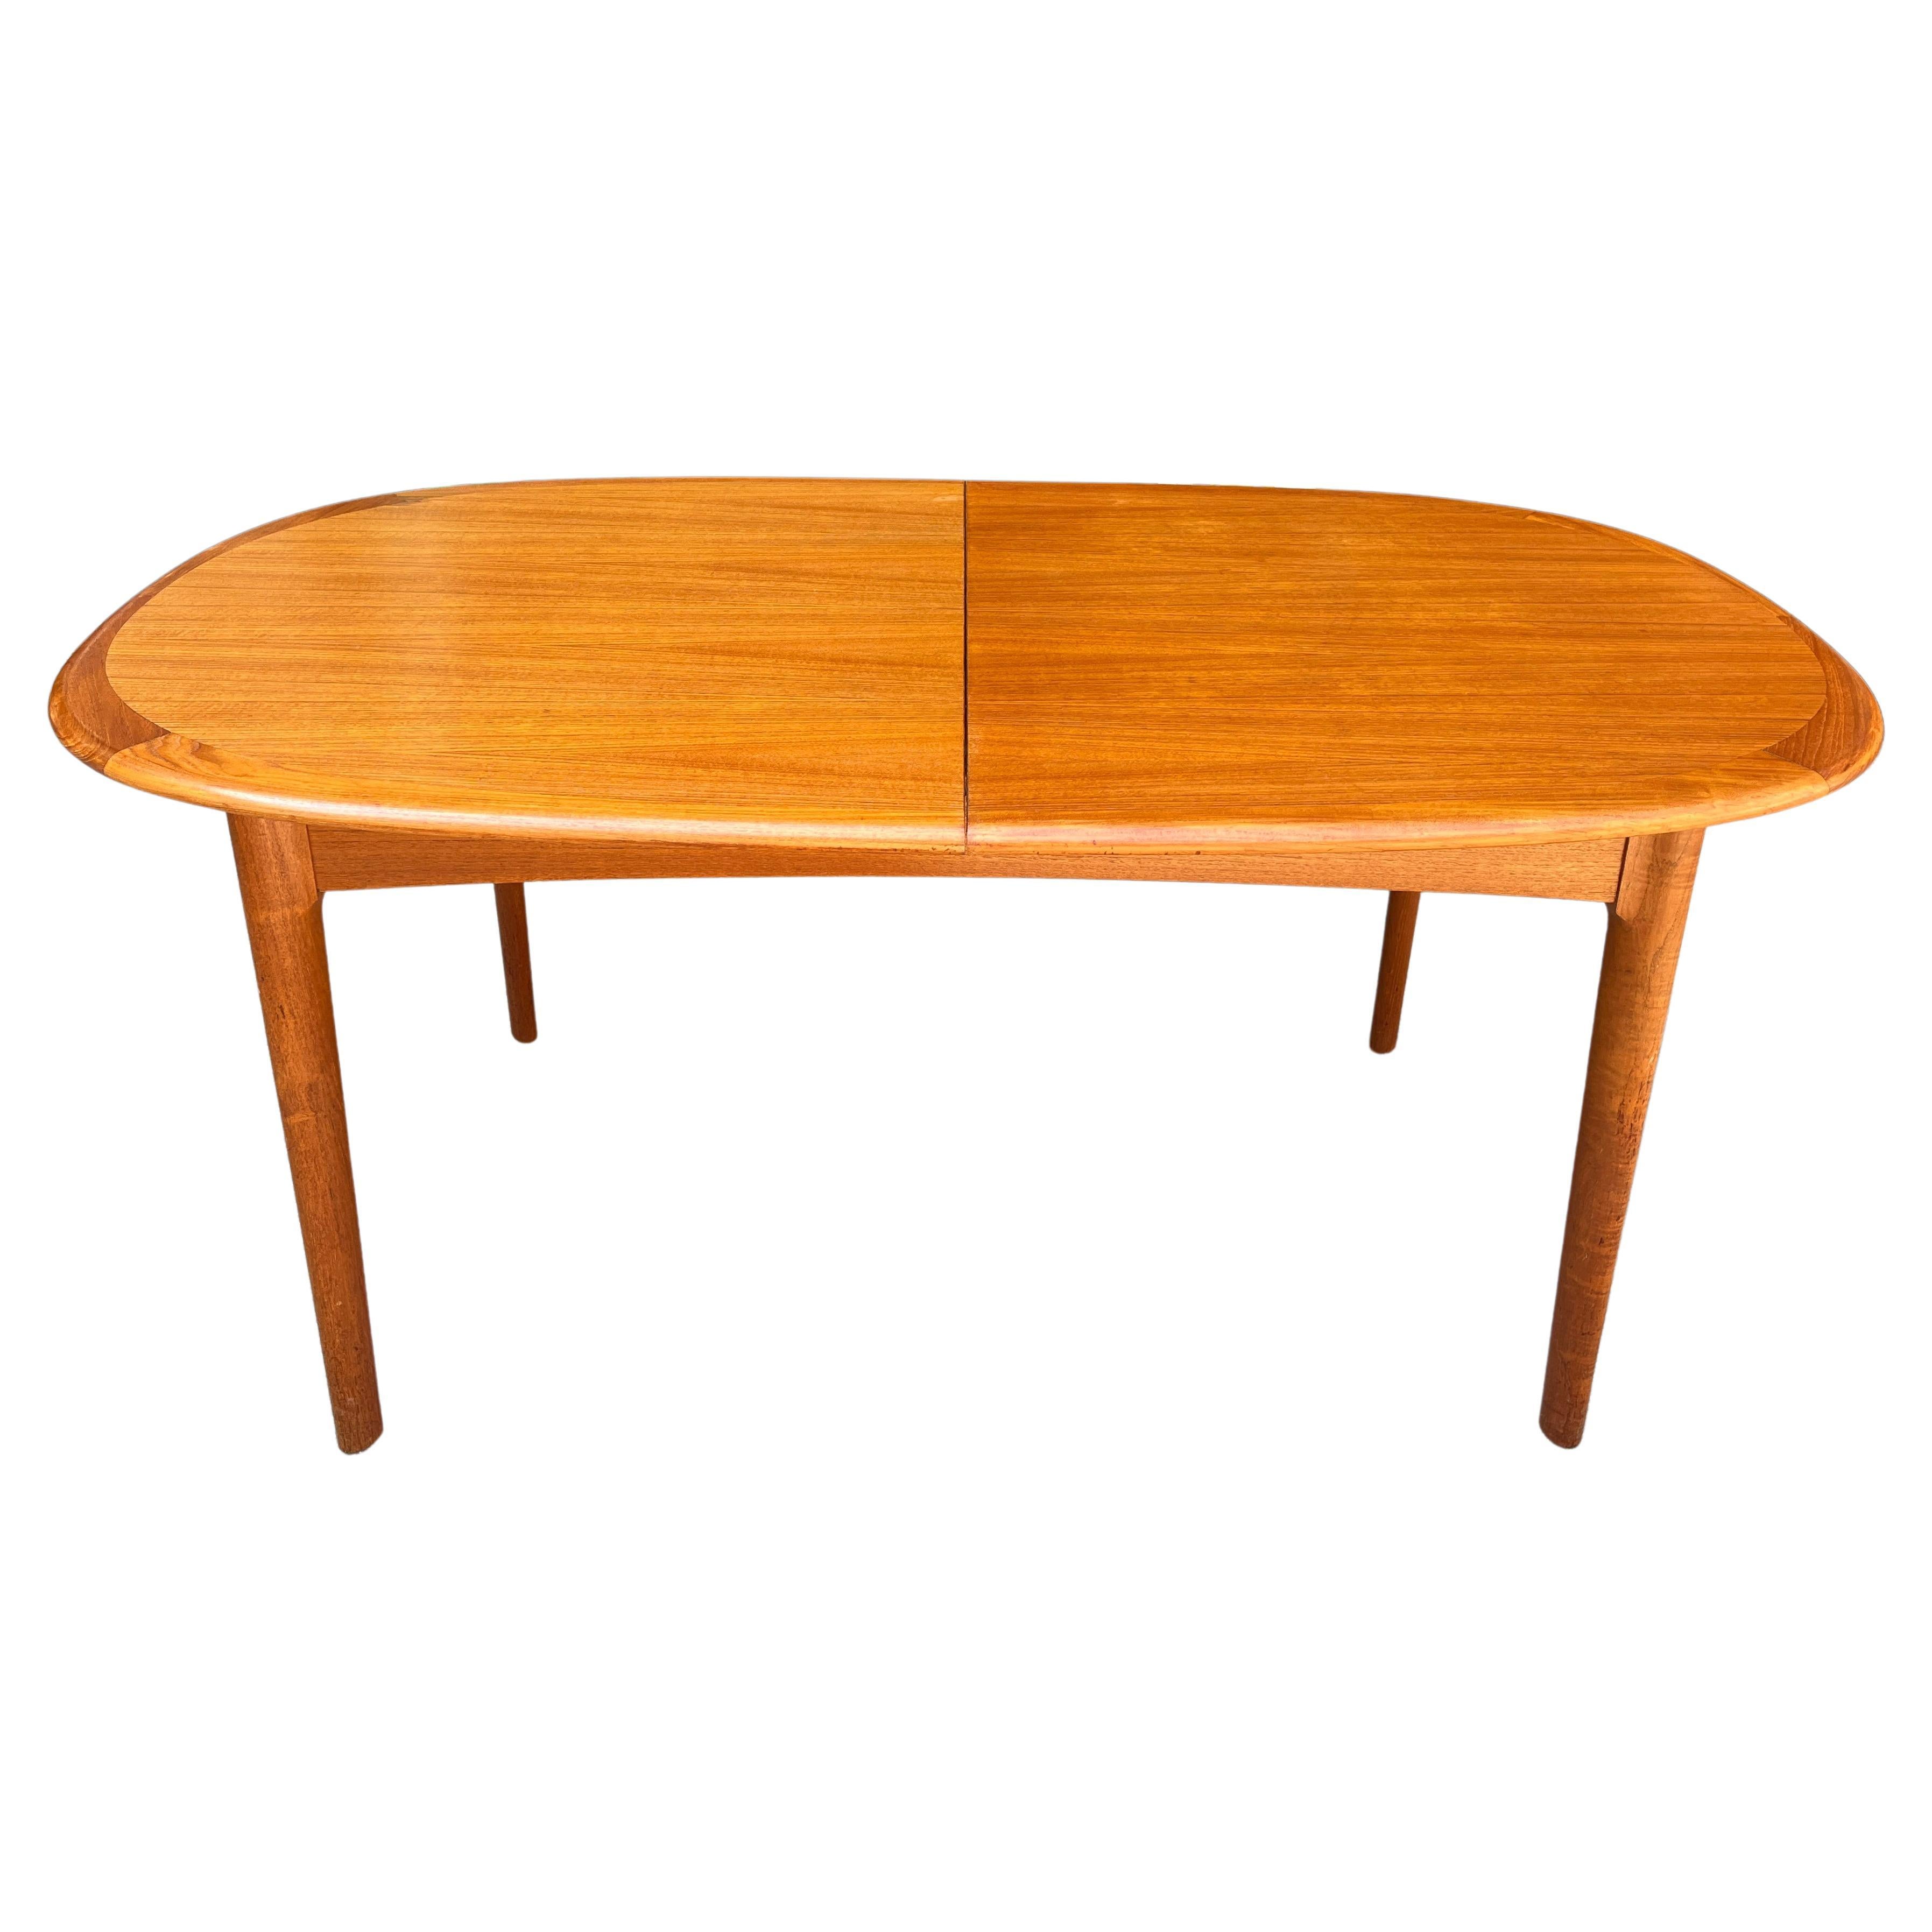 Midcentury Elliptical Oval Teak Expandable Dining Table  For Sale 2